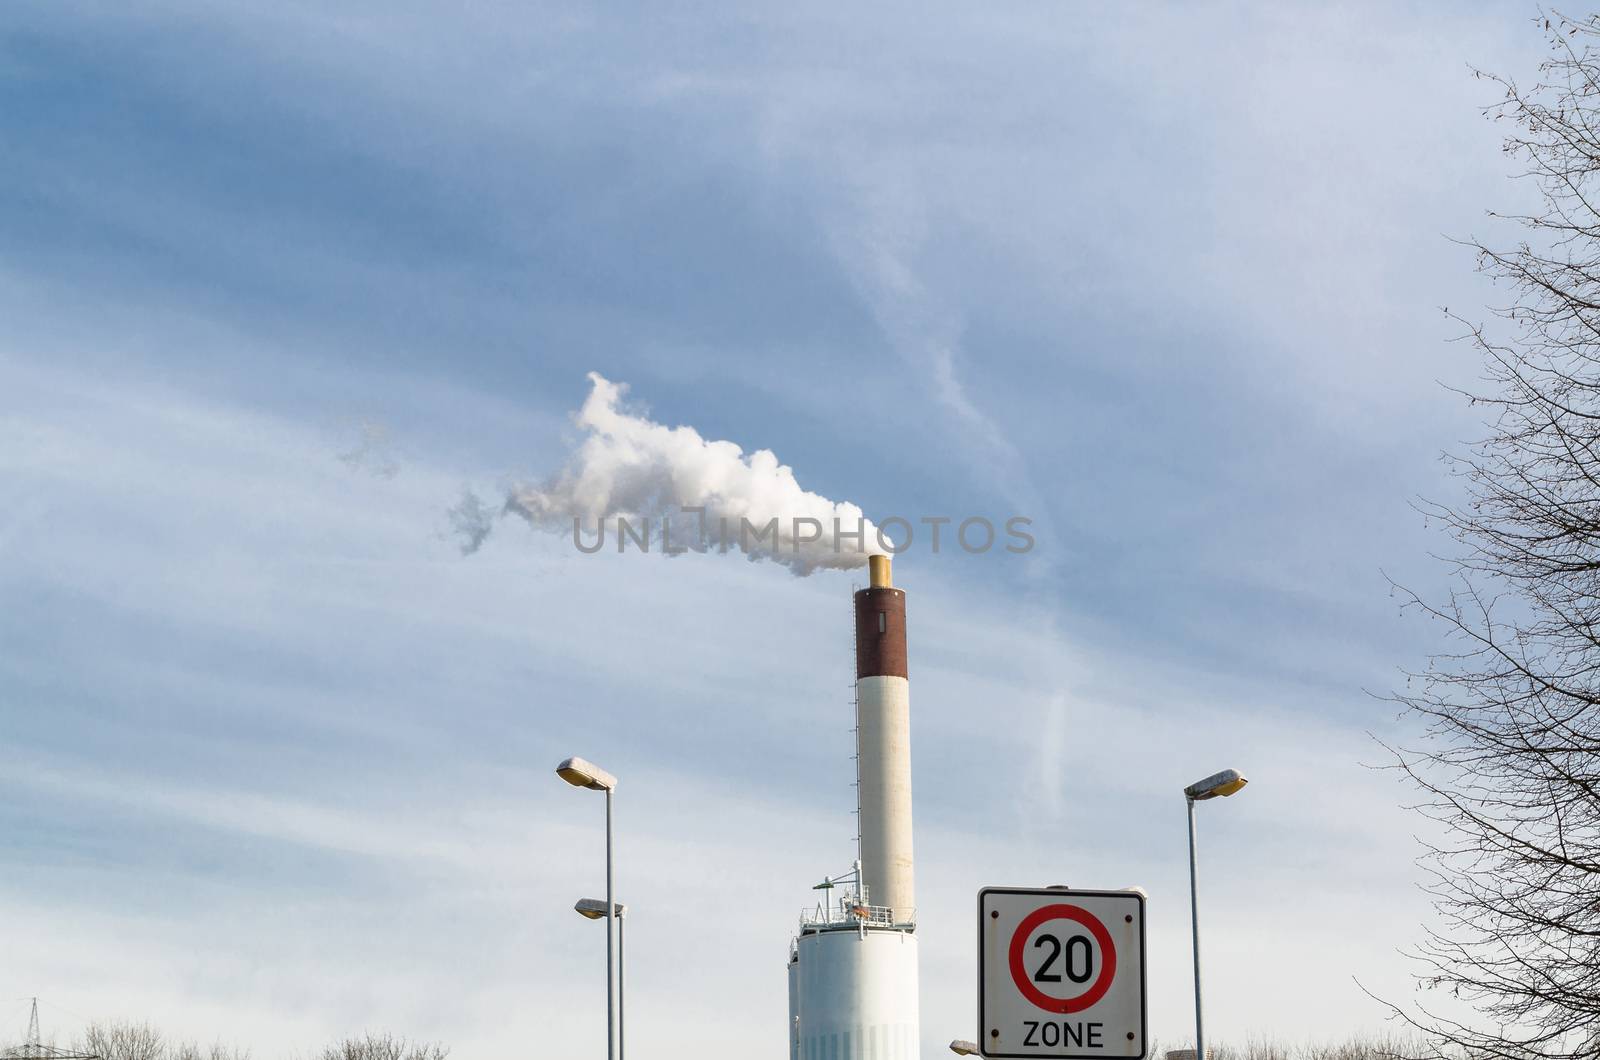 View of a power plant. Smoke comes from the chimney.